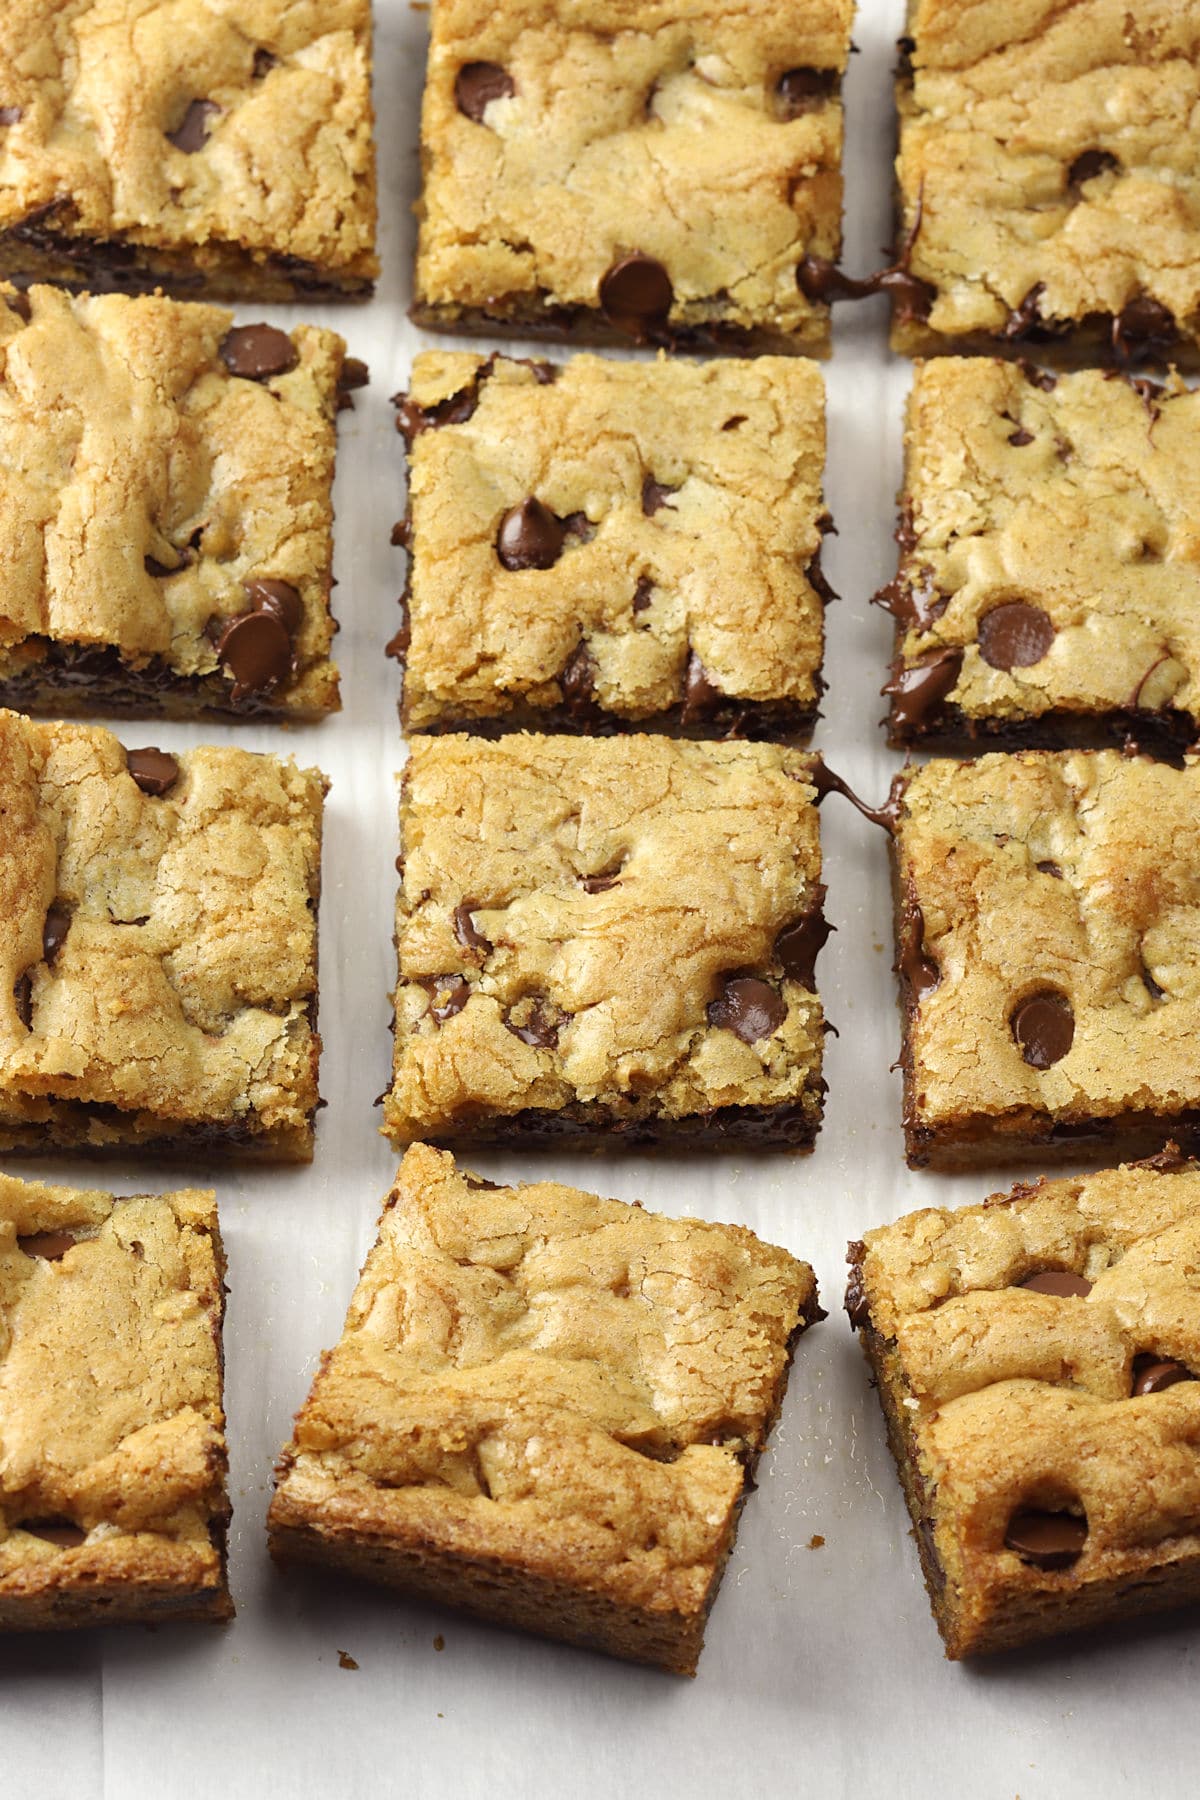 Cookie bars sliced into squares on a sheet of parchment paper.